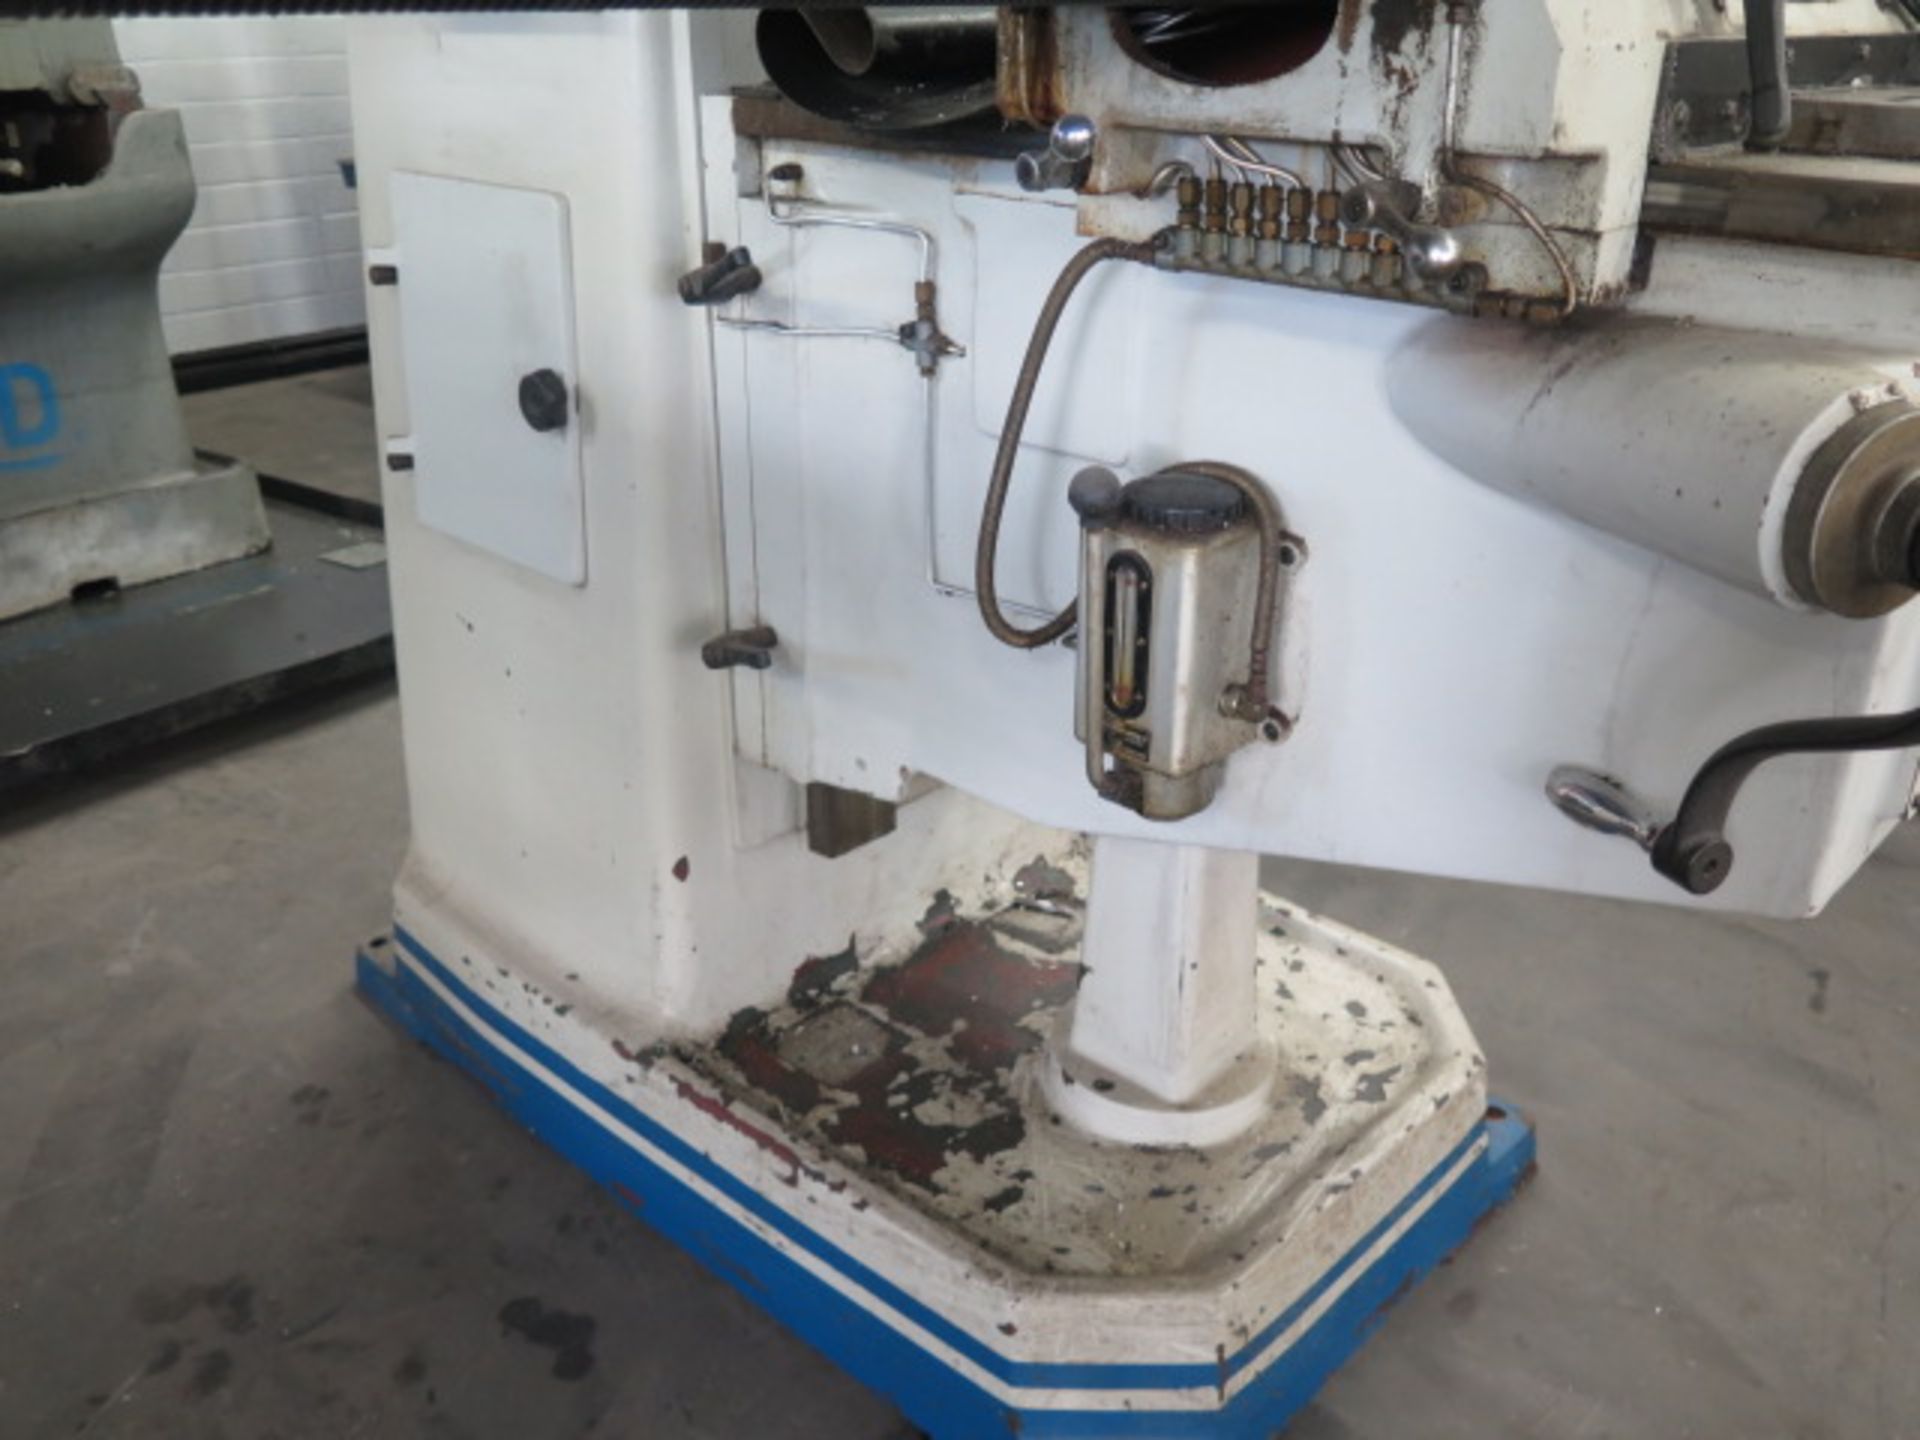 Acra AM-3 Vertical Mill s/n 961819 w/ Sargon 3-Axis DRO, 3Hp Motor, 60-4200 Dial RPM, Sold AS IS - Image 12 of 13